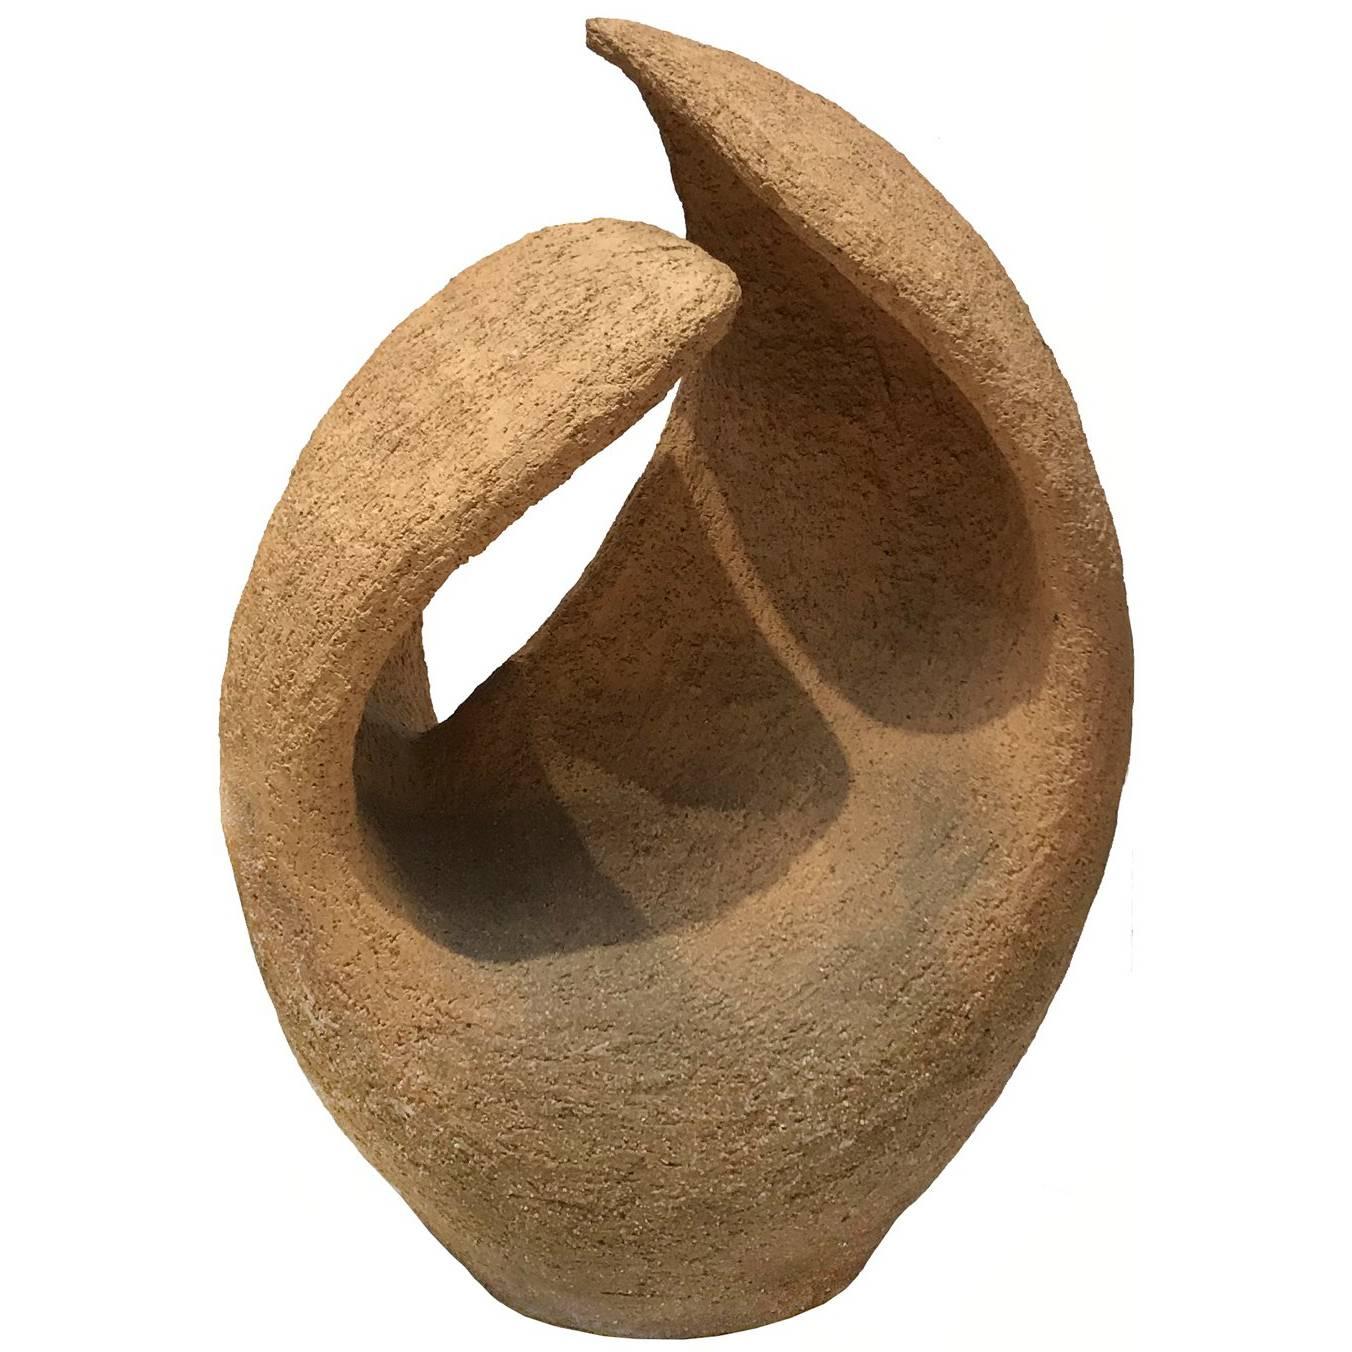 1970s Abstract Folded Oval Terracotta Sculpture